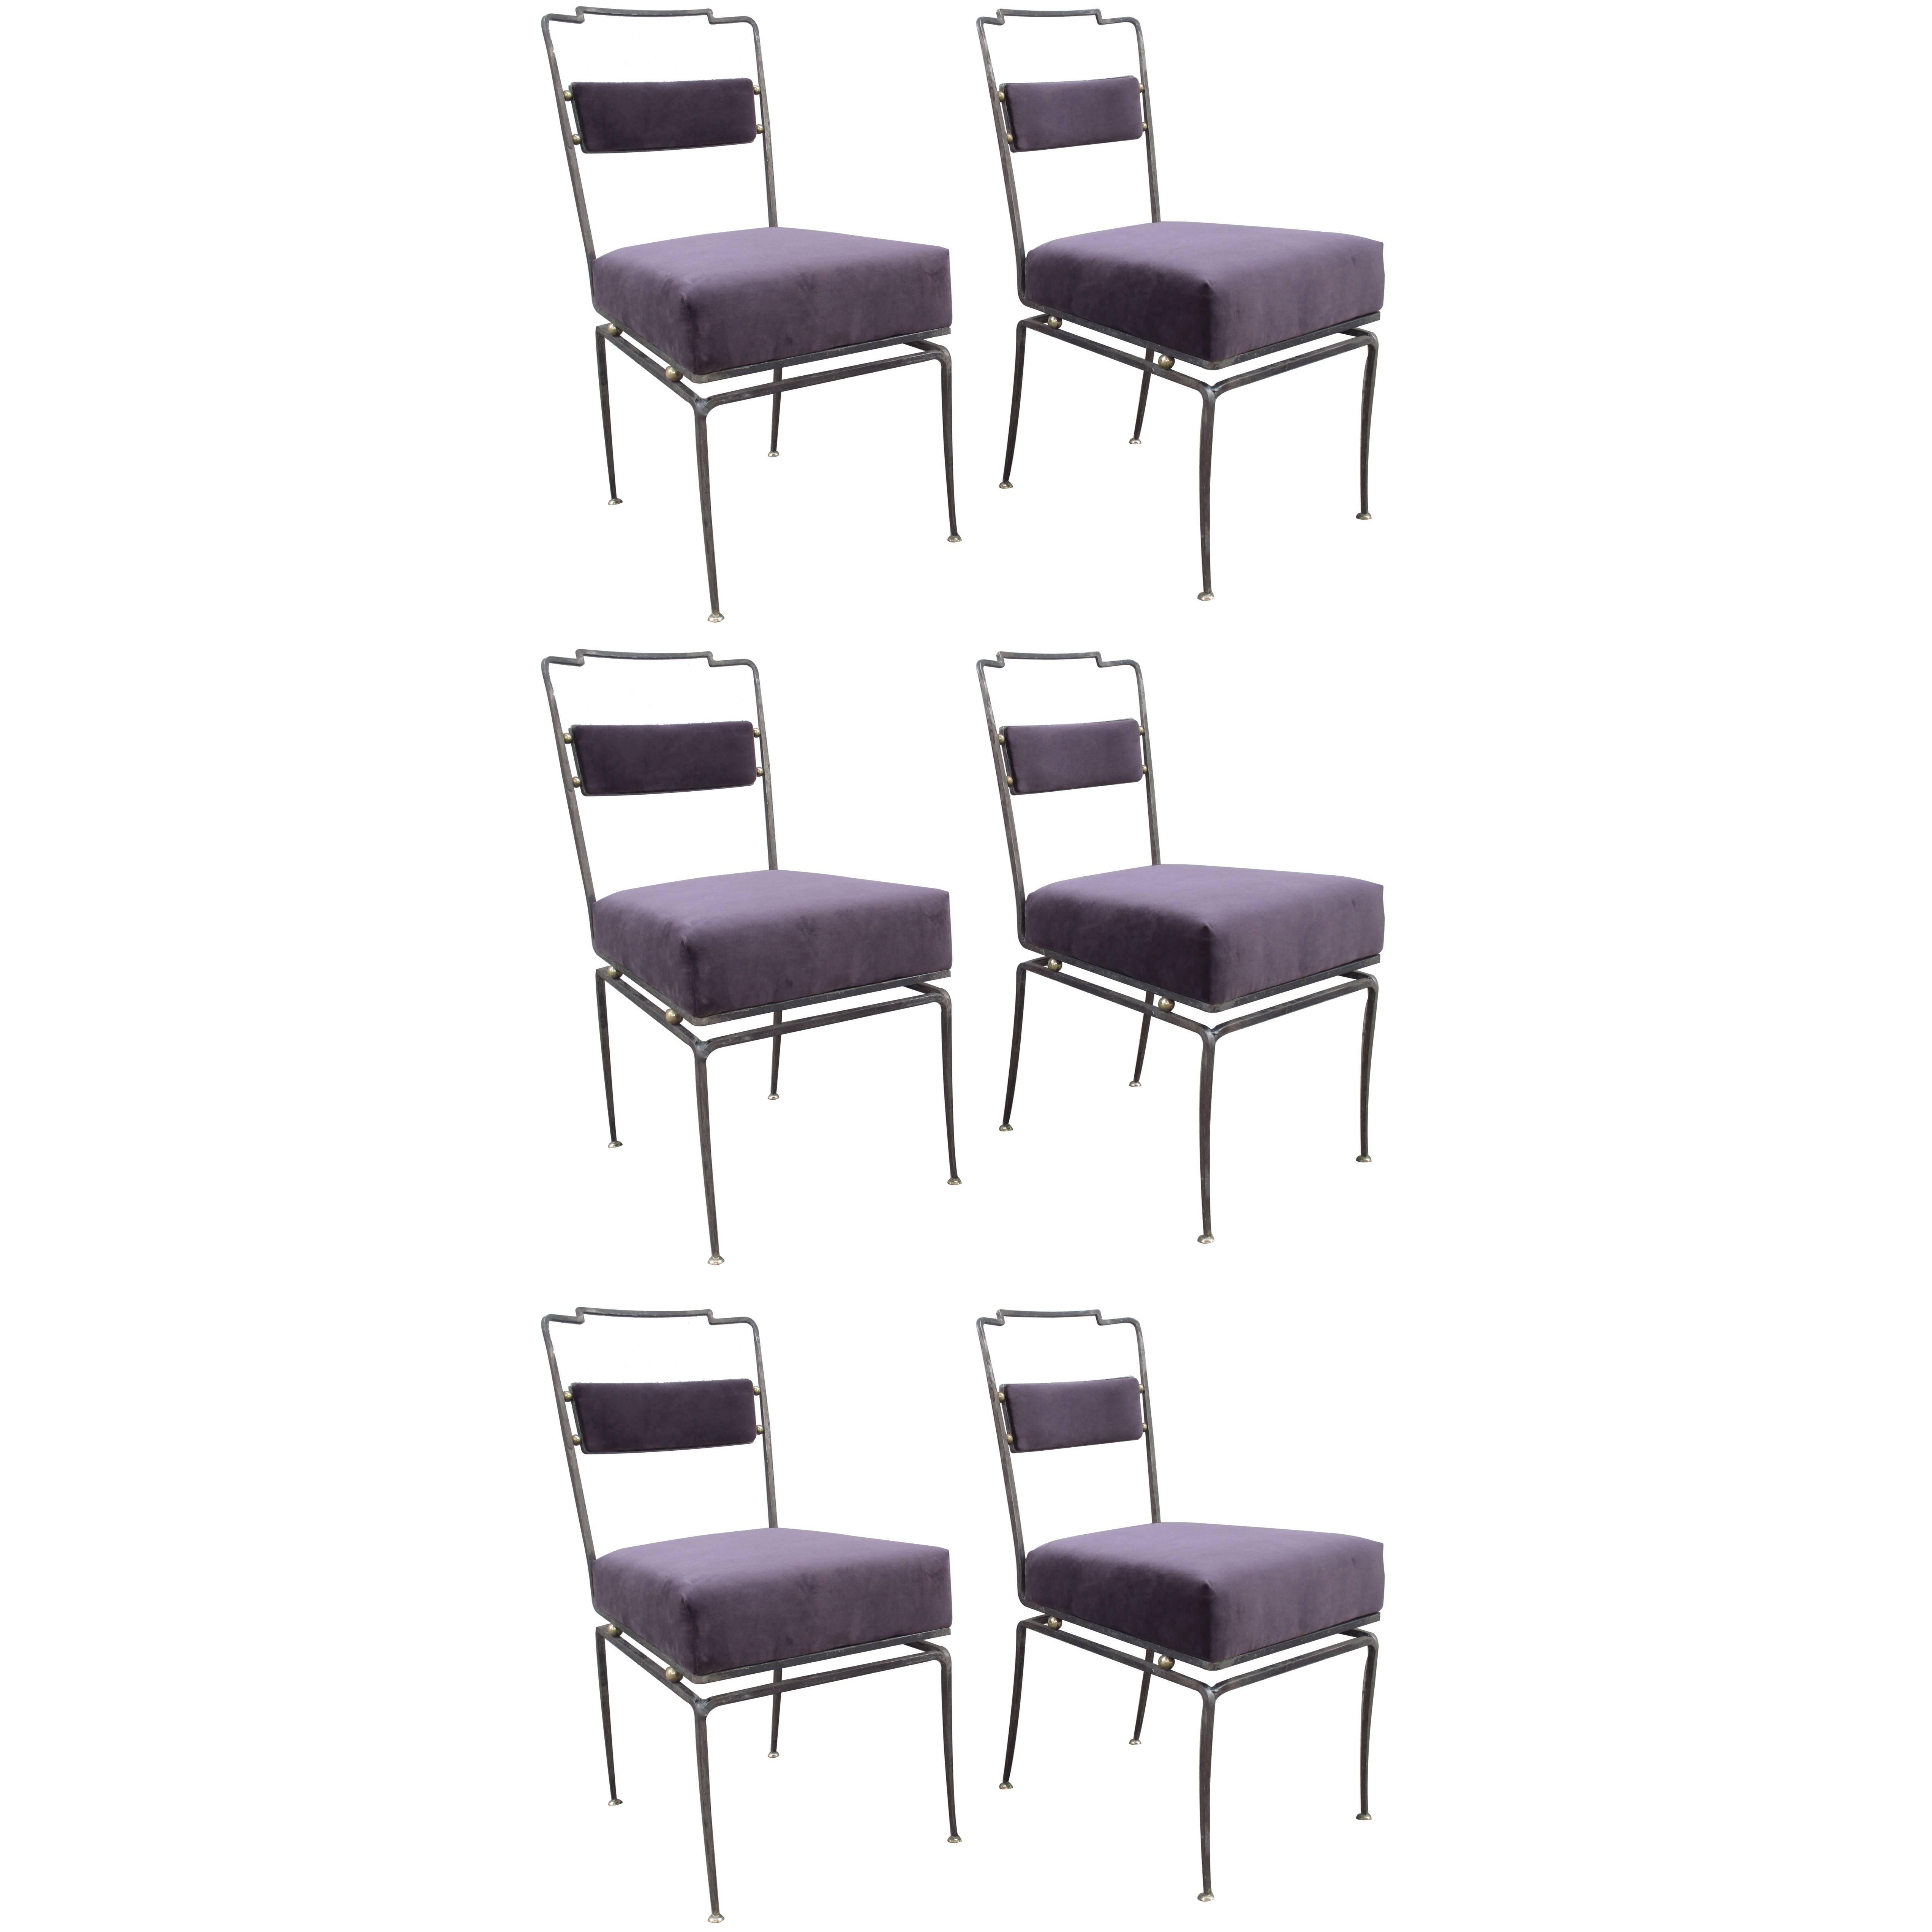 Set of Six Metal and Bronce Chairs by Arturo Pani in Purple Velvet 